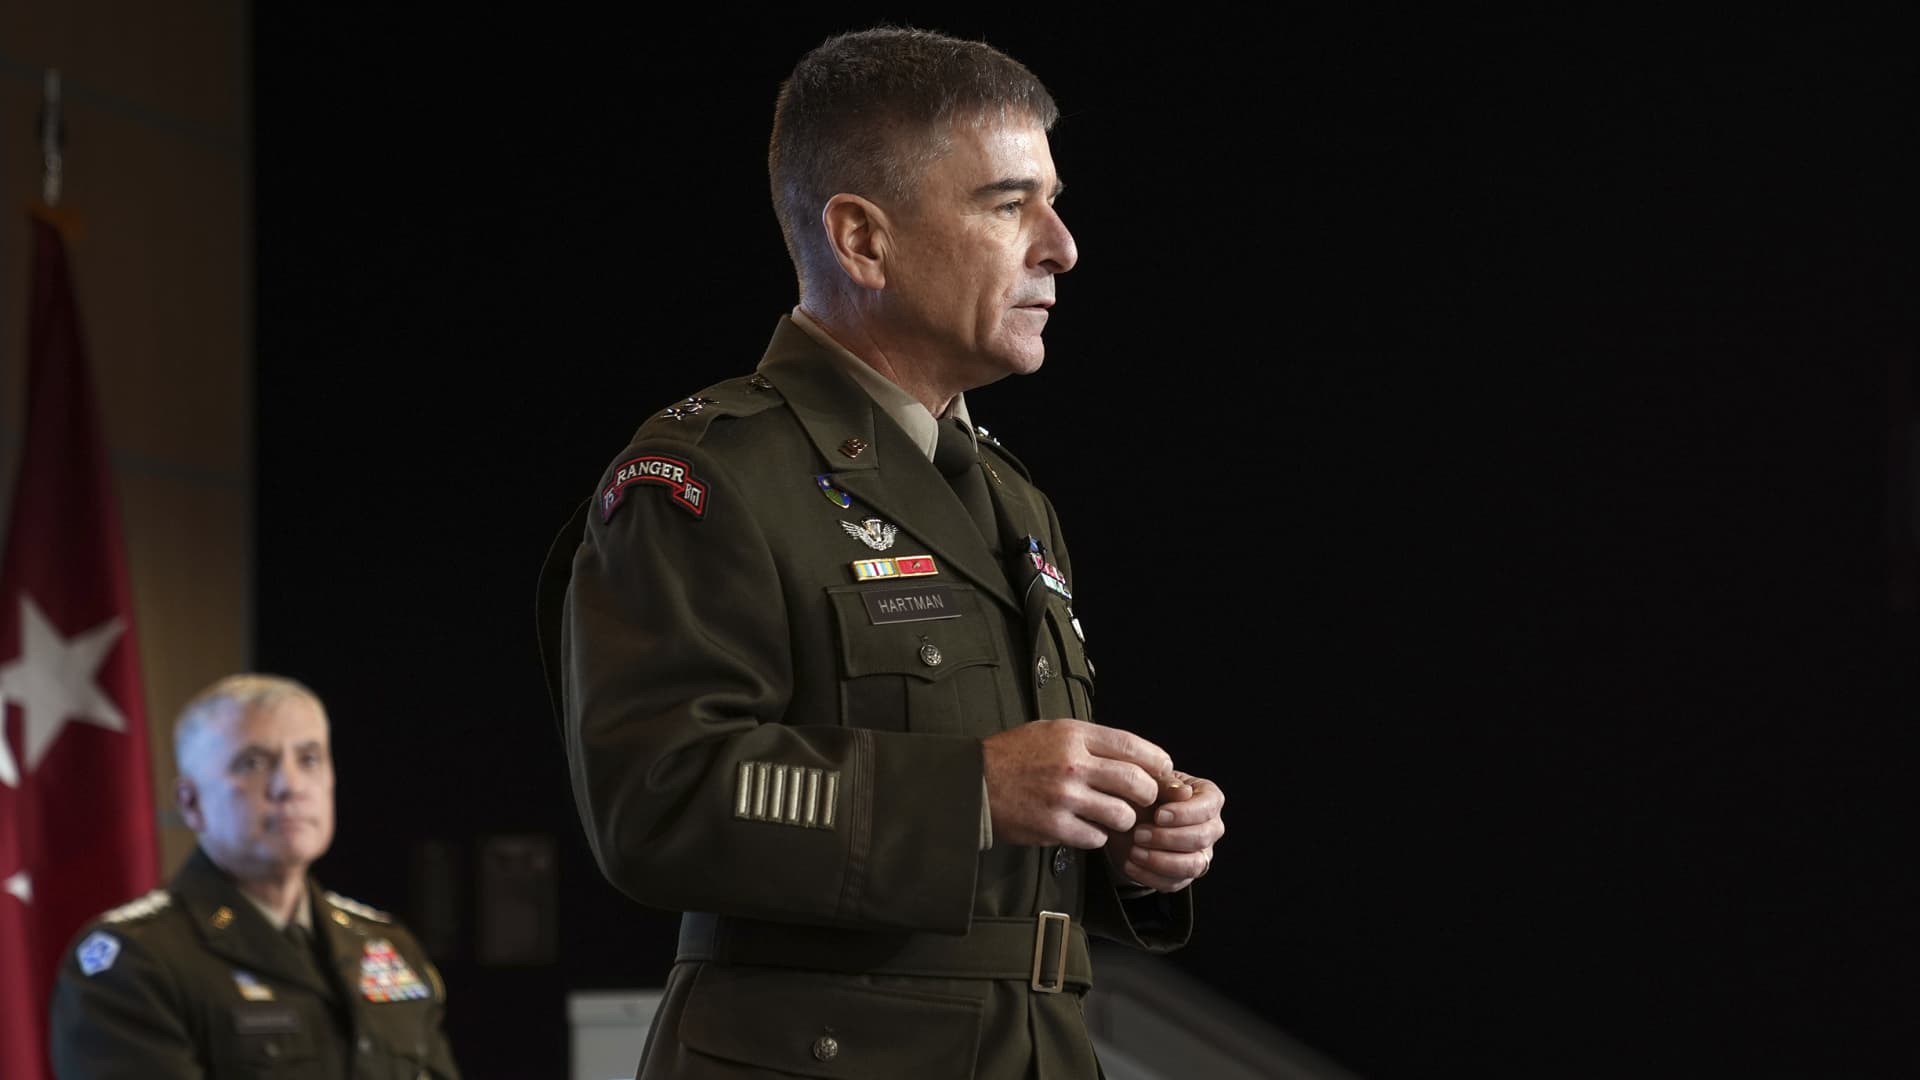 In this image provided by U.S. Cyber Command, Army Maj. Gen. William Hartman, who leads the U.S. Cyber National Mission Force, speaks during a ceremony at U.S. Cyber Command headquarters at Fort George E. Meade, Md., Monday, Dec. 19, 2022.